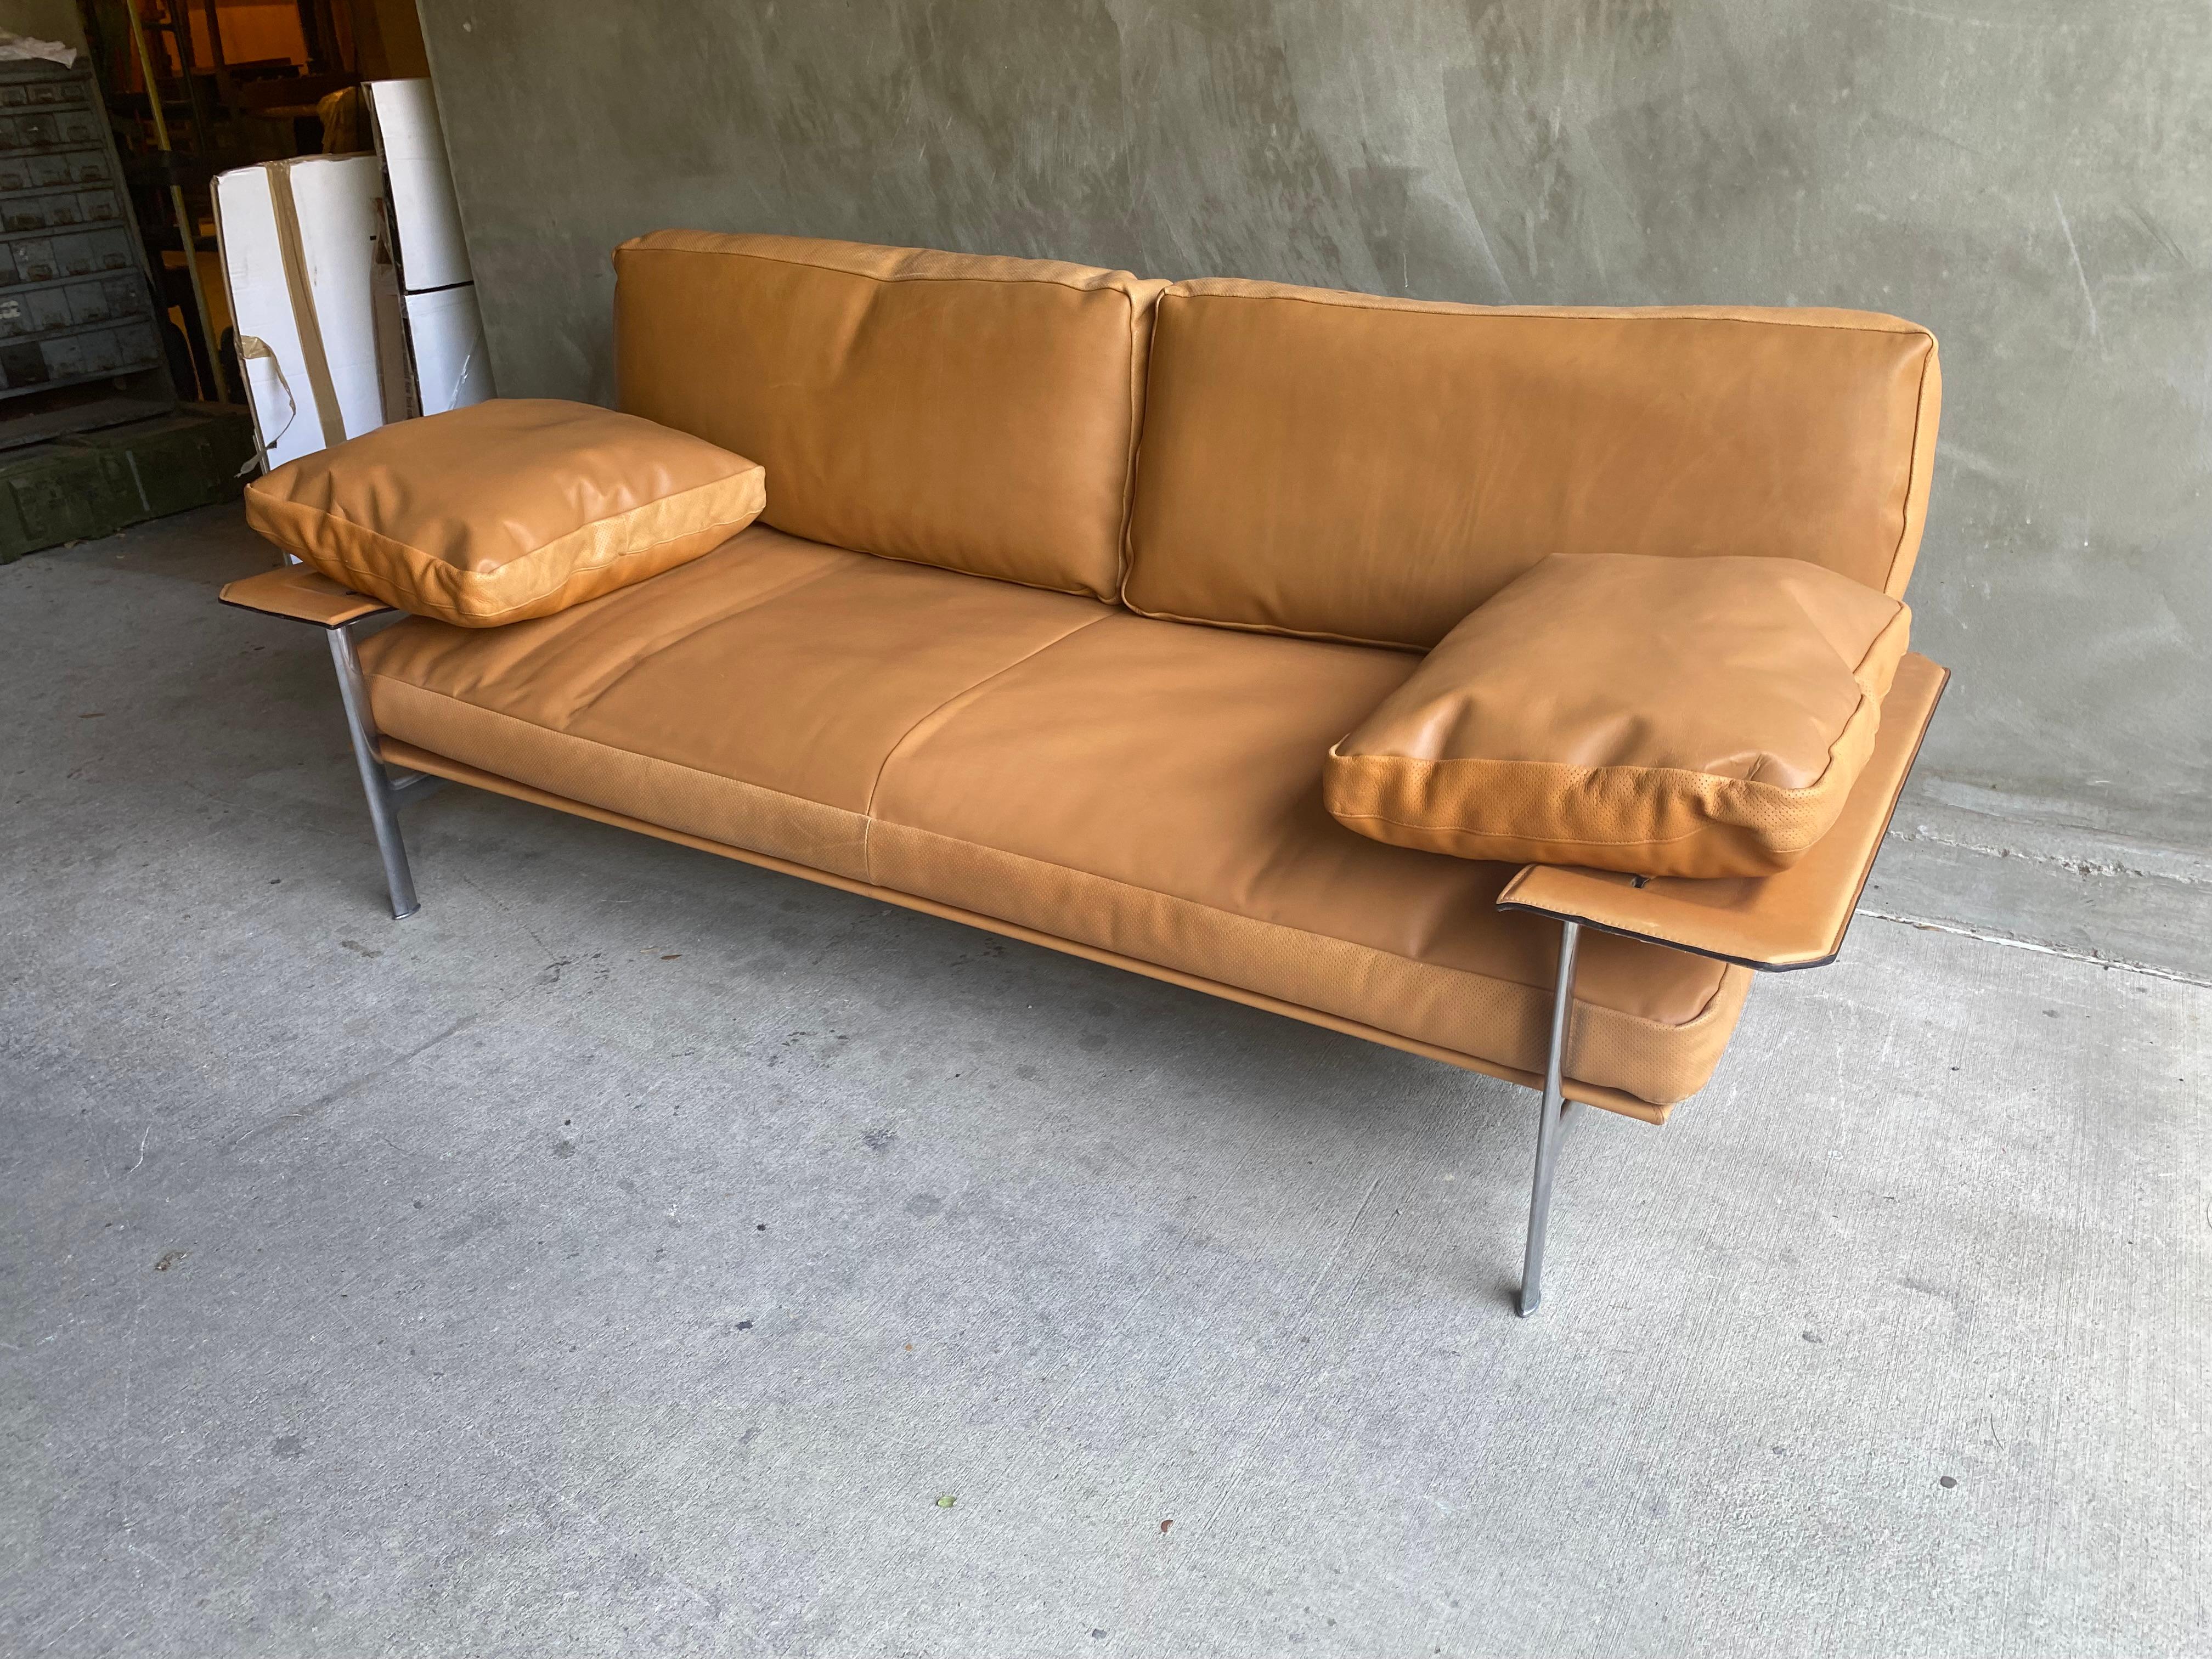 Extraordinary recent edition (exact date of manufacture is unknown) of Antonio Citterio's 1979 Diesis DS217 model sofa for B & B Italia. Analine dyed saddle colored leather and polished aluminum frame in almost perfect condition. Leather color could